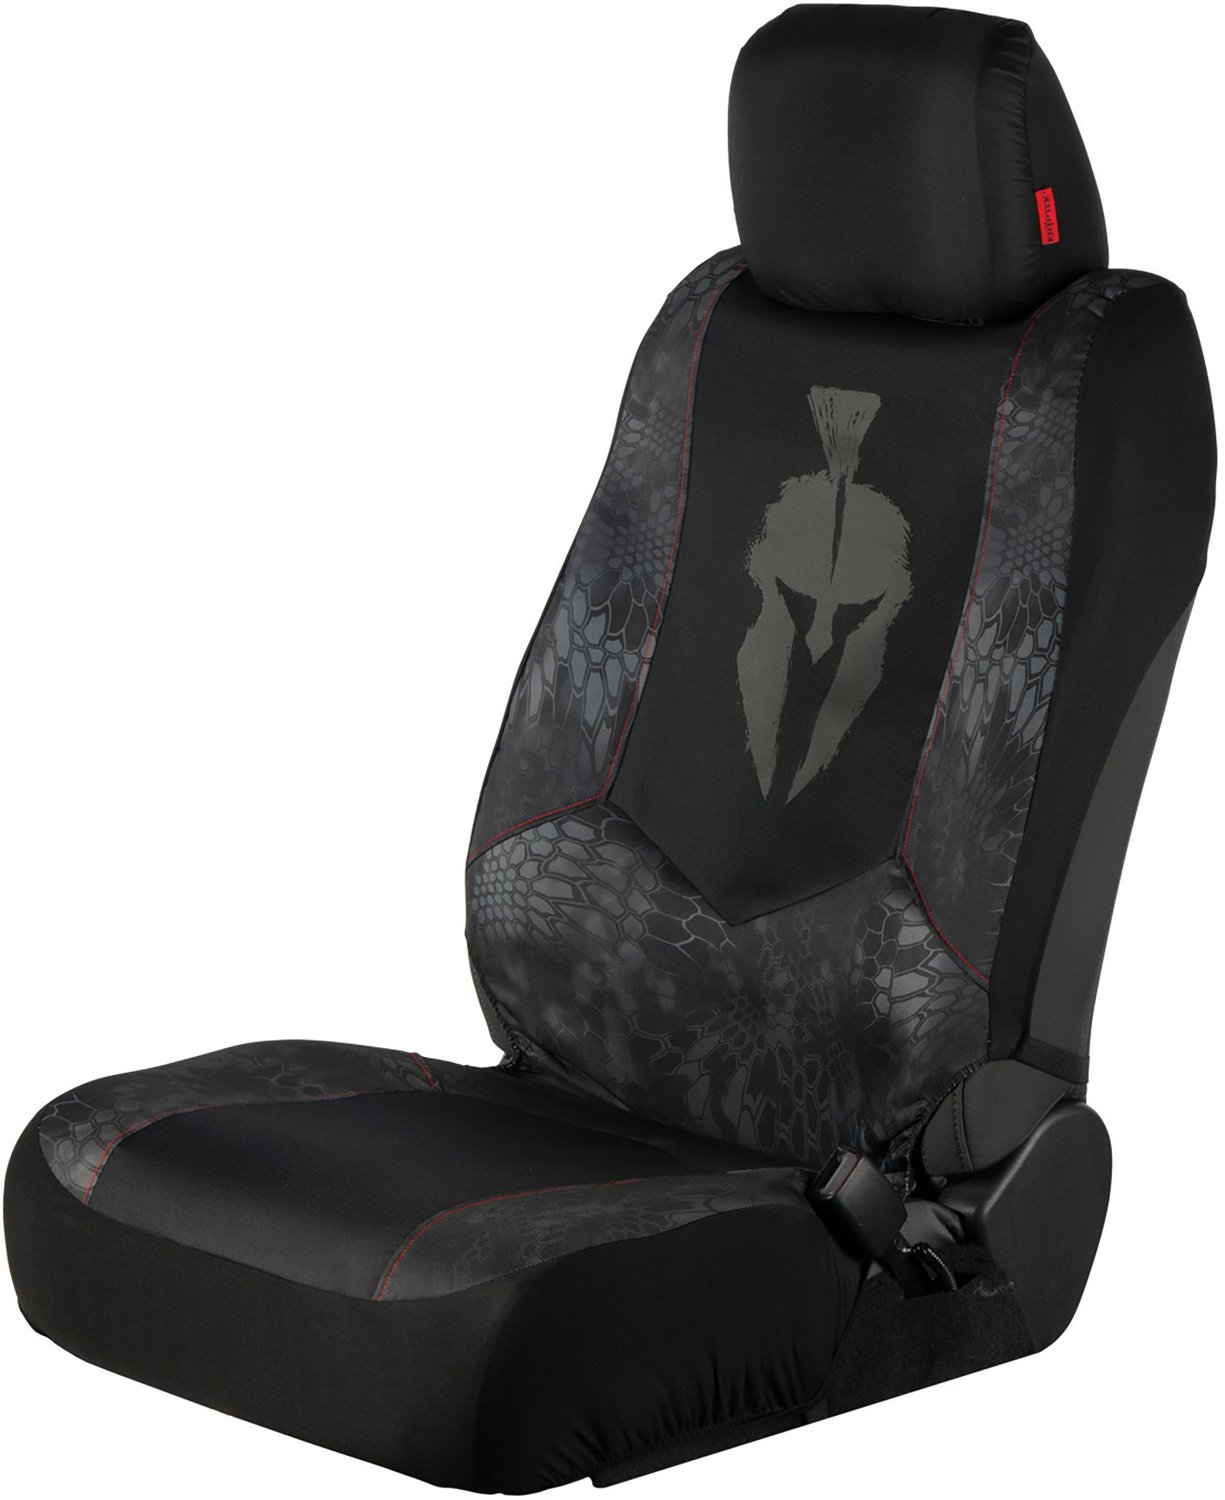 Kryptek Low Back Seat Cover Free Shipping At Academy